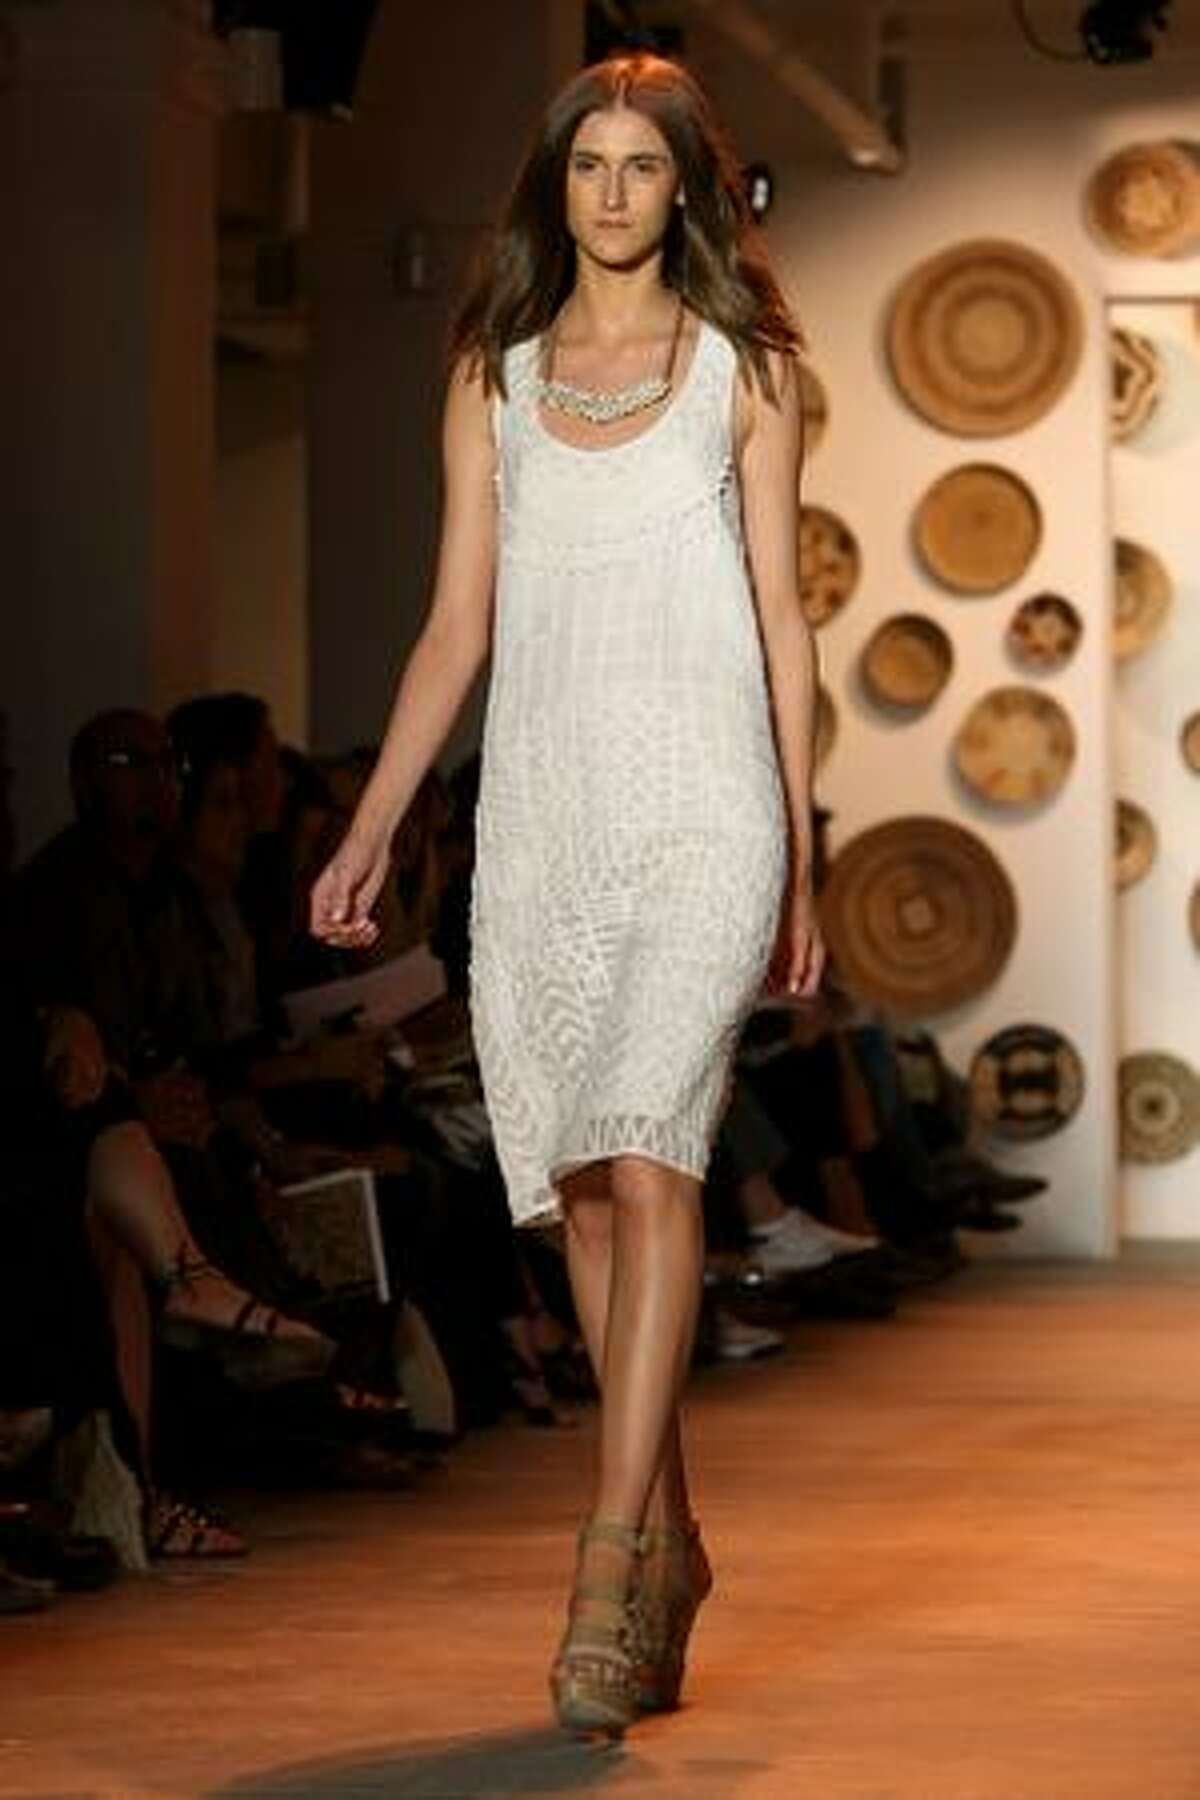 A model walks the runway at the Adam Spring 2010 Fashion Show during Mercedes-Benz Fashion Week at Milk Studios on September 12 in New York, New York.